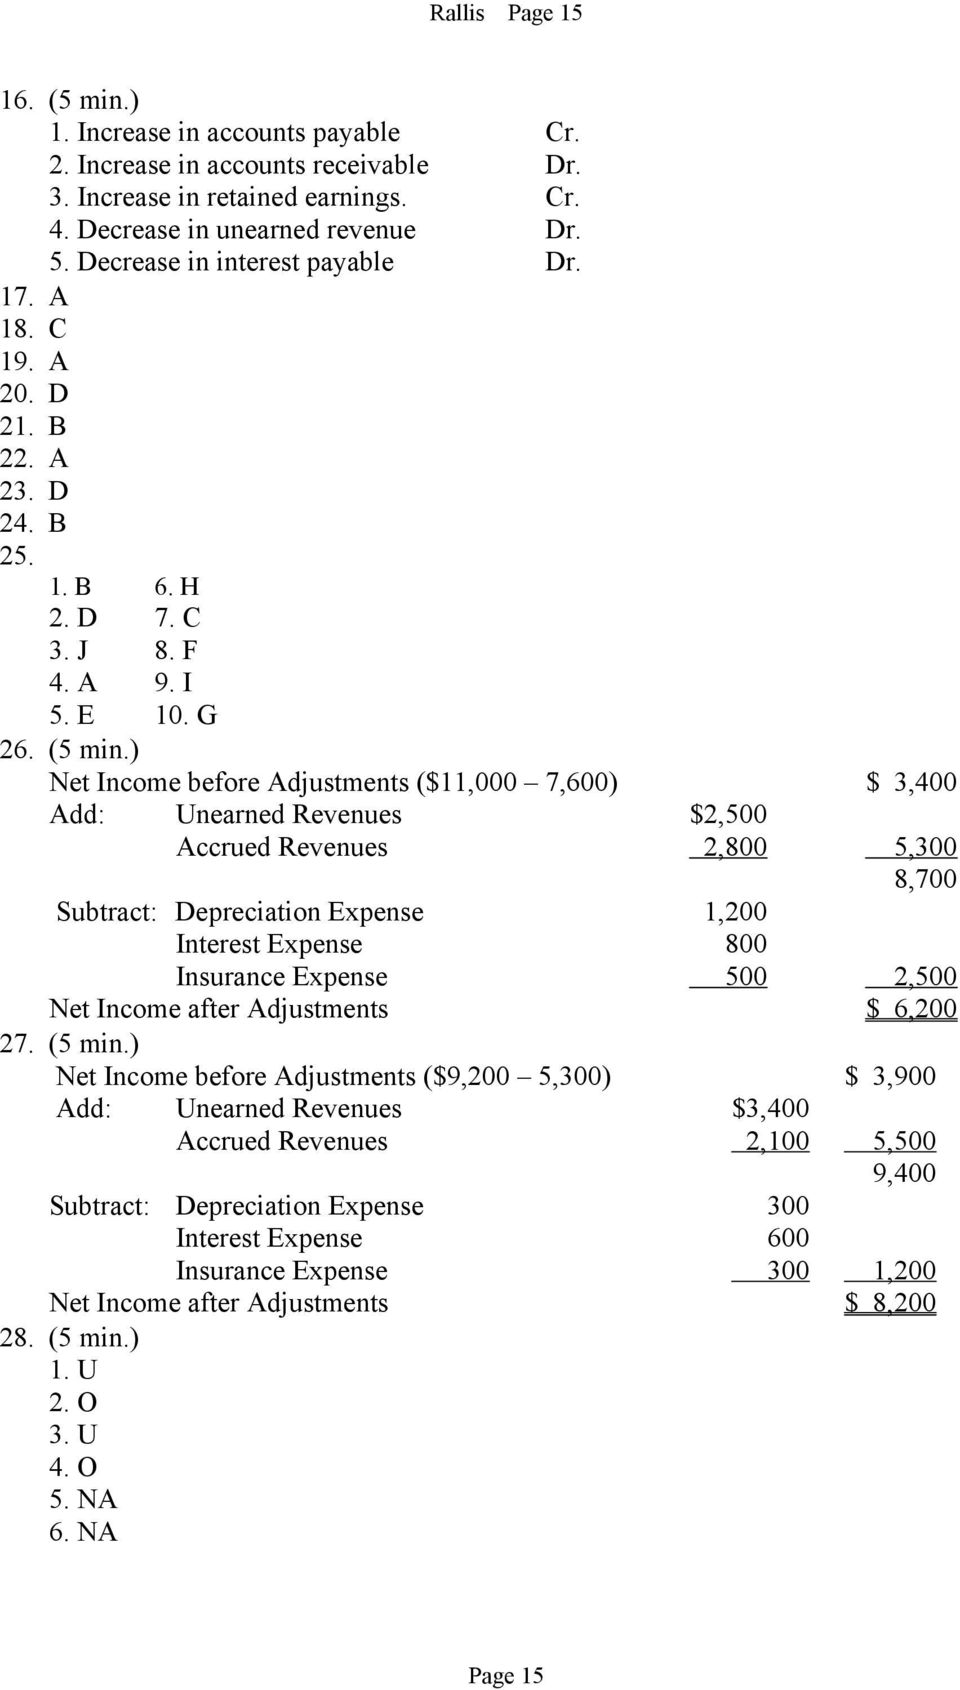 ) Net Income before Adjustments ($11,000 7,600) $ 3,400 Add: Unearned Revenues $2,500 Accrued Revenues 2,800 5,300 8,700 Subtract: Depreciation Expense 1,200 Interest Expense 800 Insurance Expense